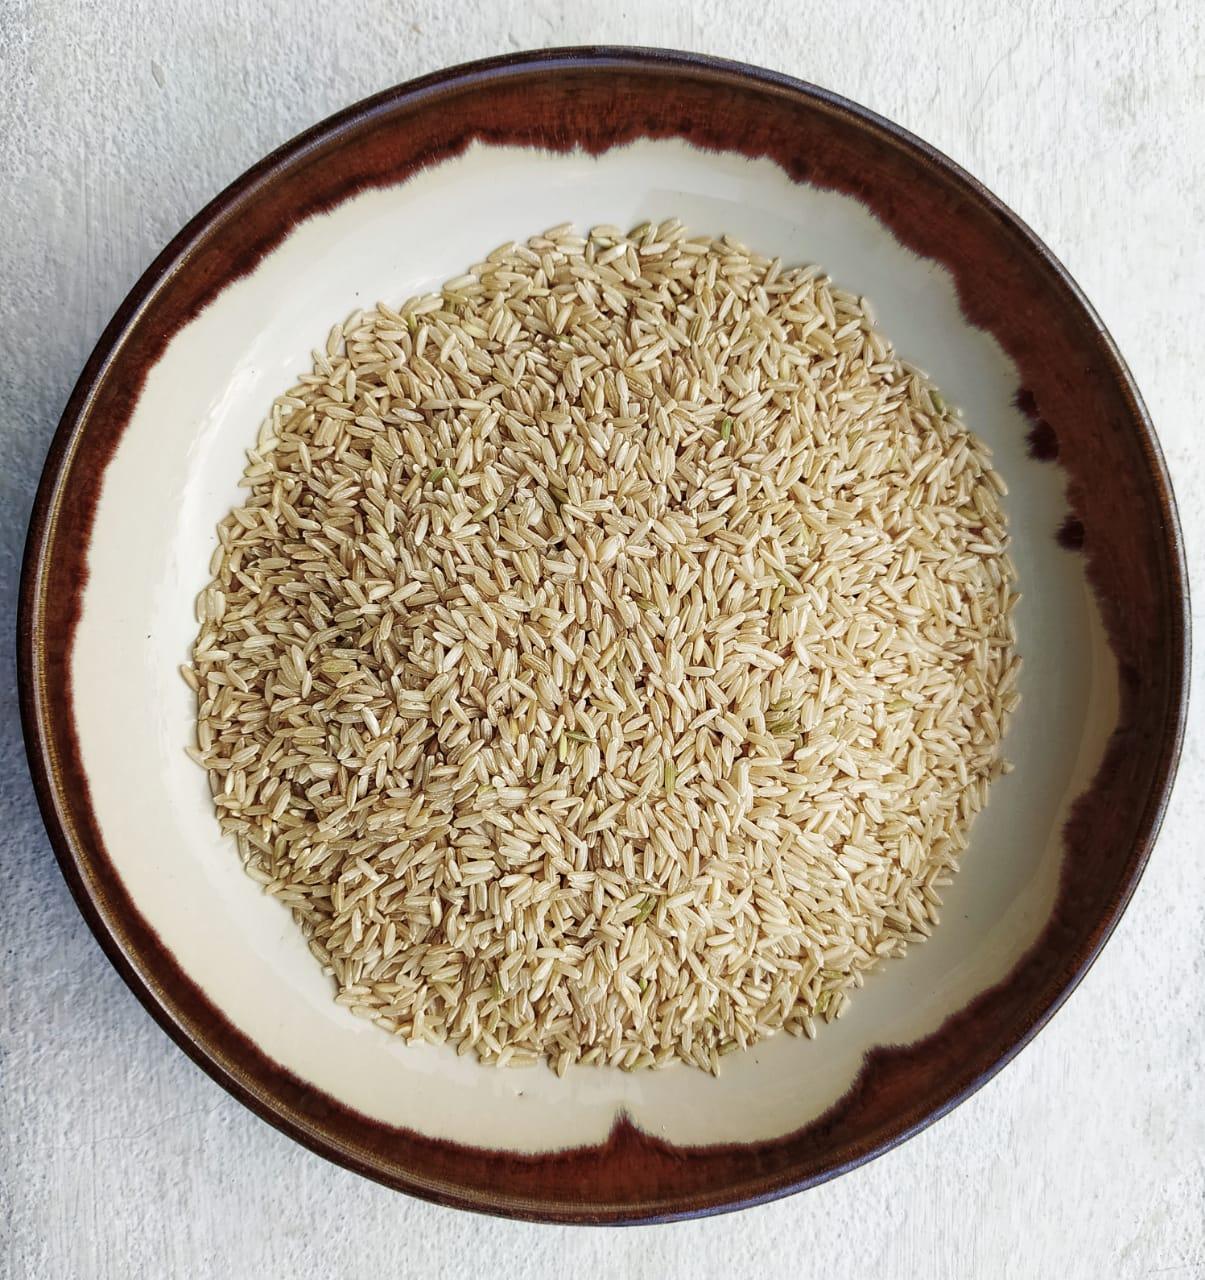 Best rice for Diabetes - Semi polished rice